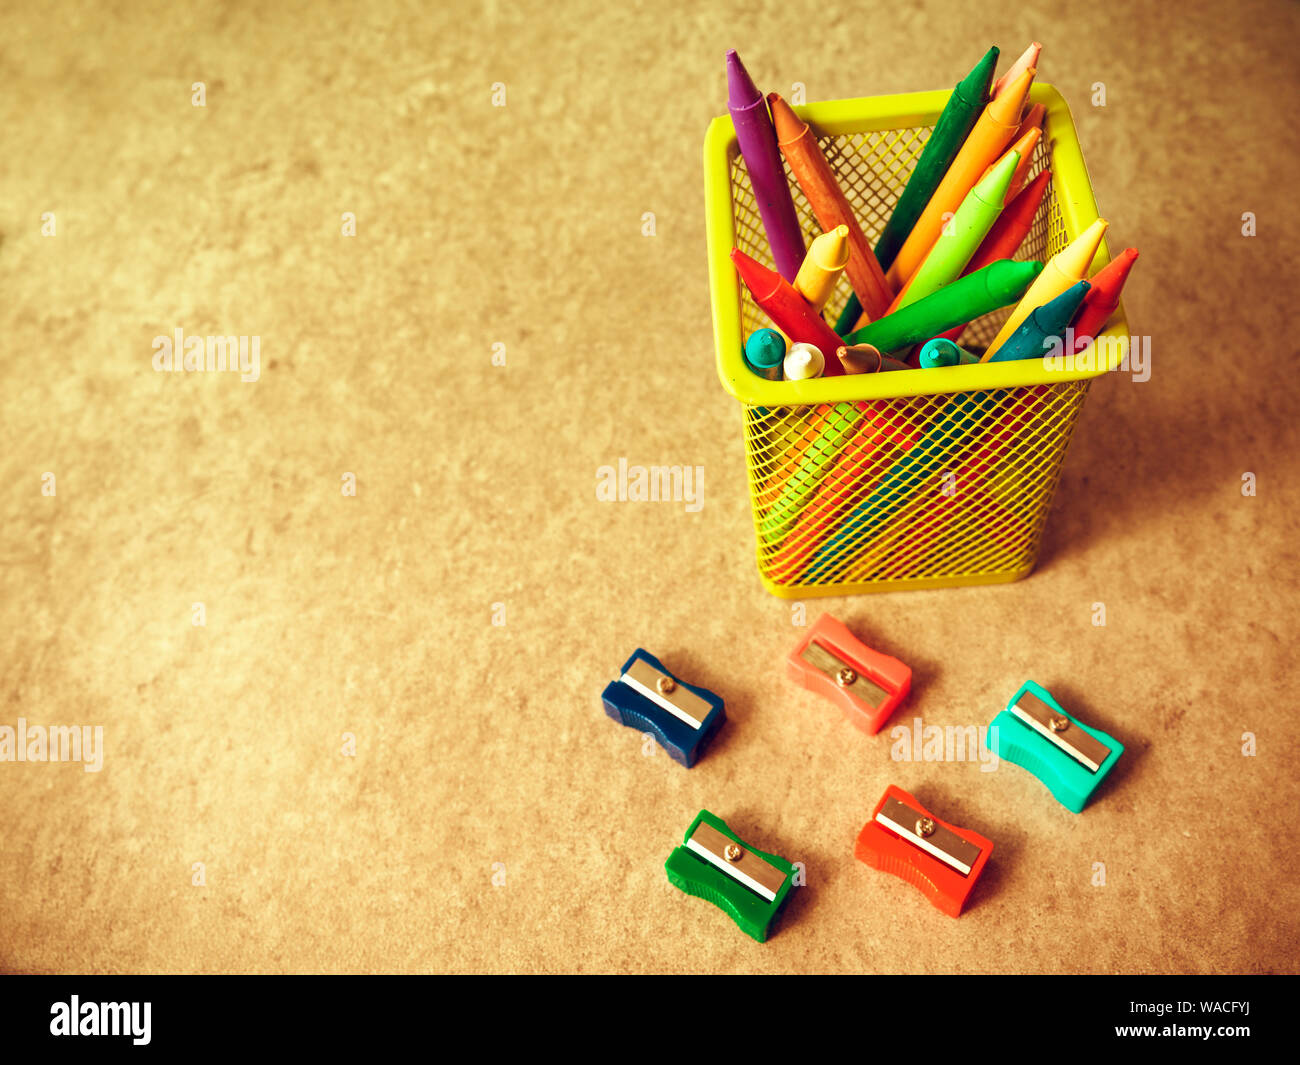 background of colored pencils to draw inside a yellow container surrounded by pencil sharpeners Stock Photo